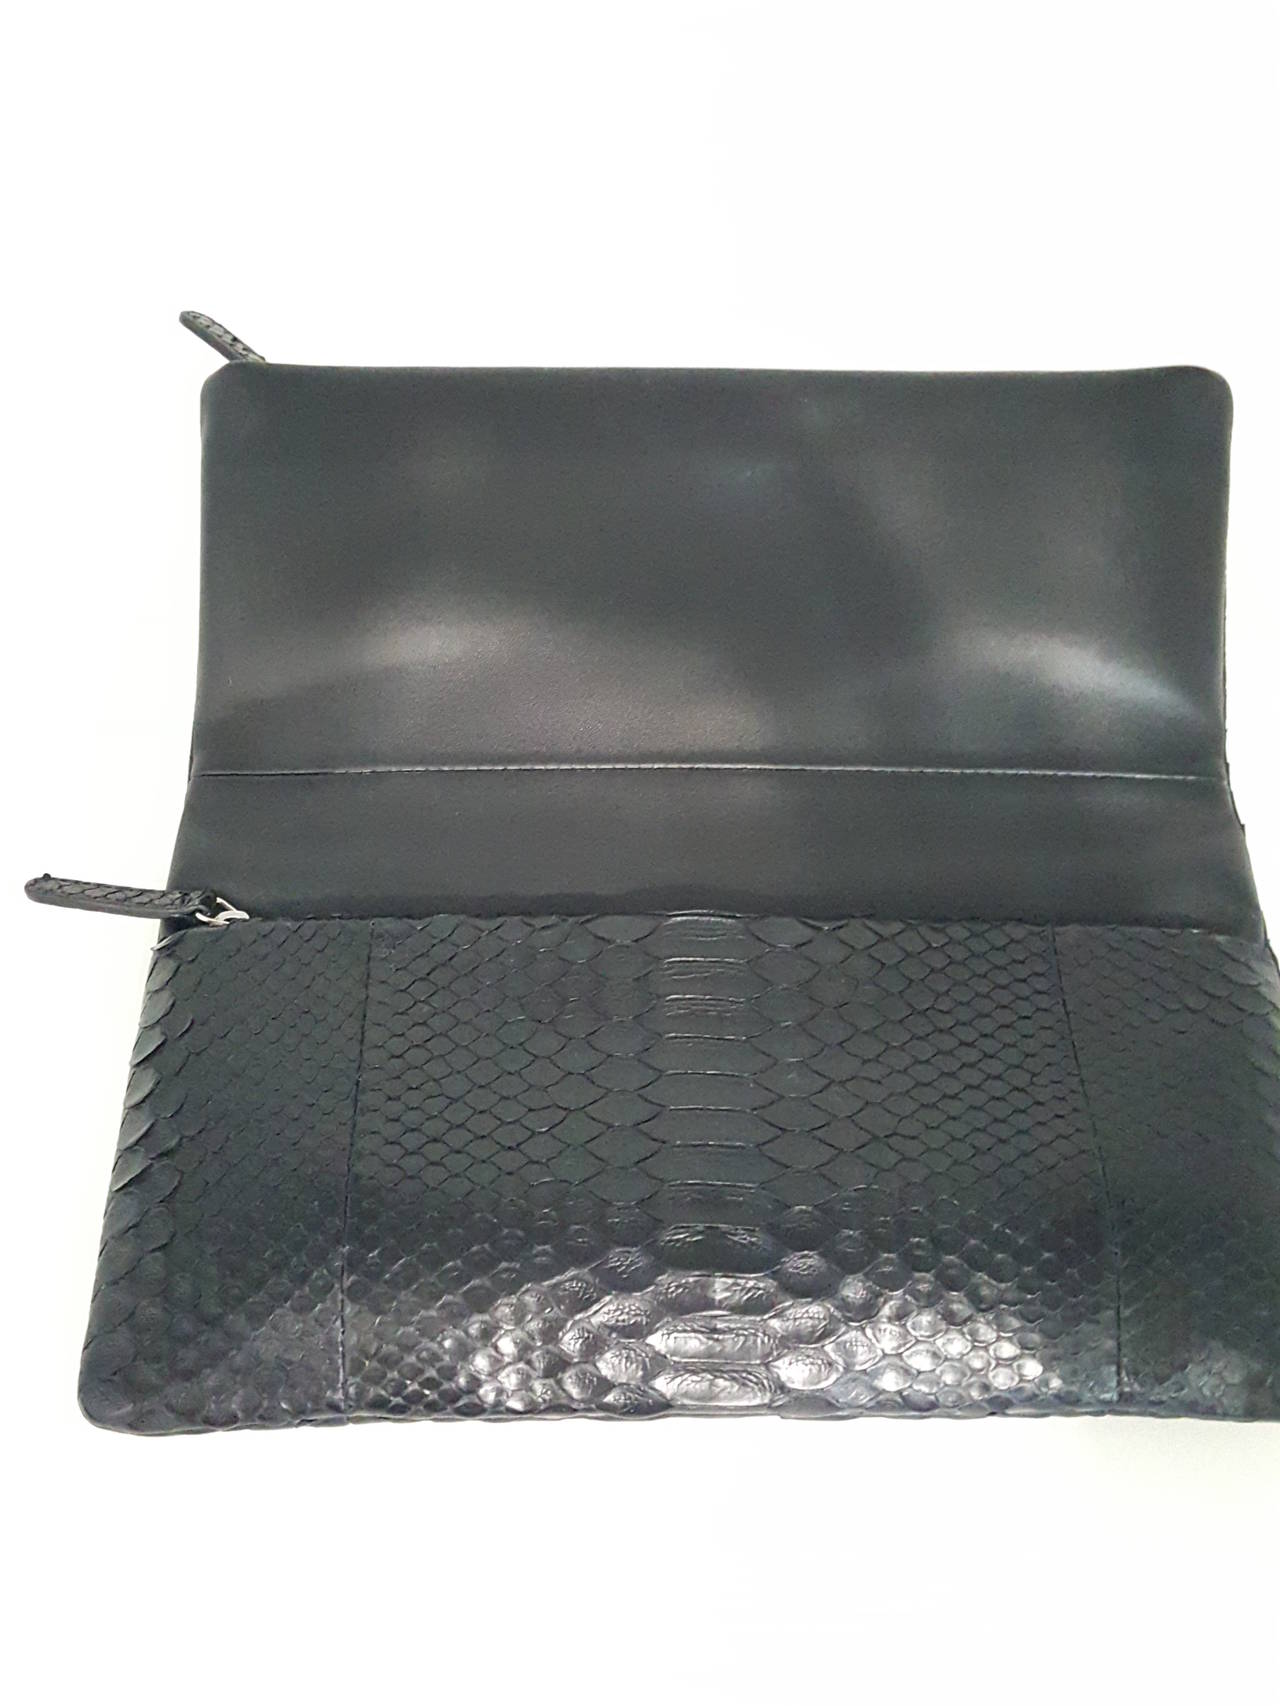 Women's CHANEL Black Python Fold Over Clutch With Silver Hardware.  NWOT